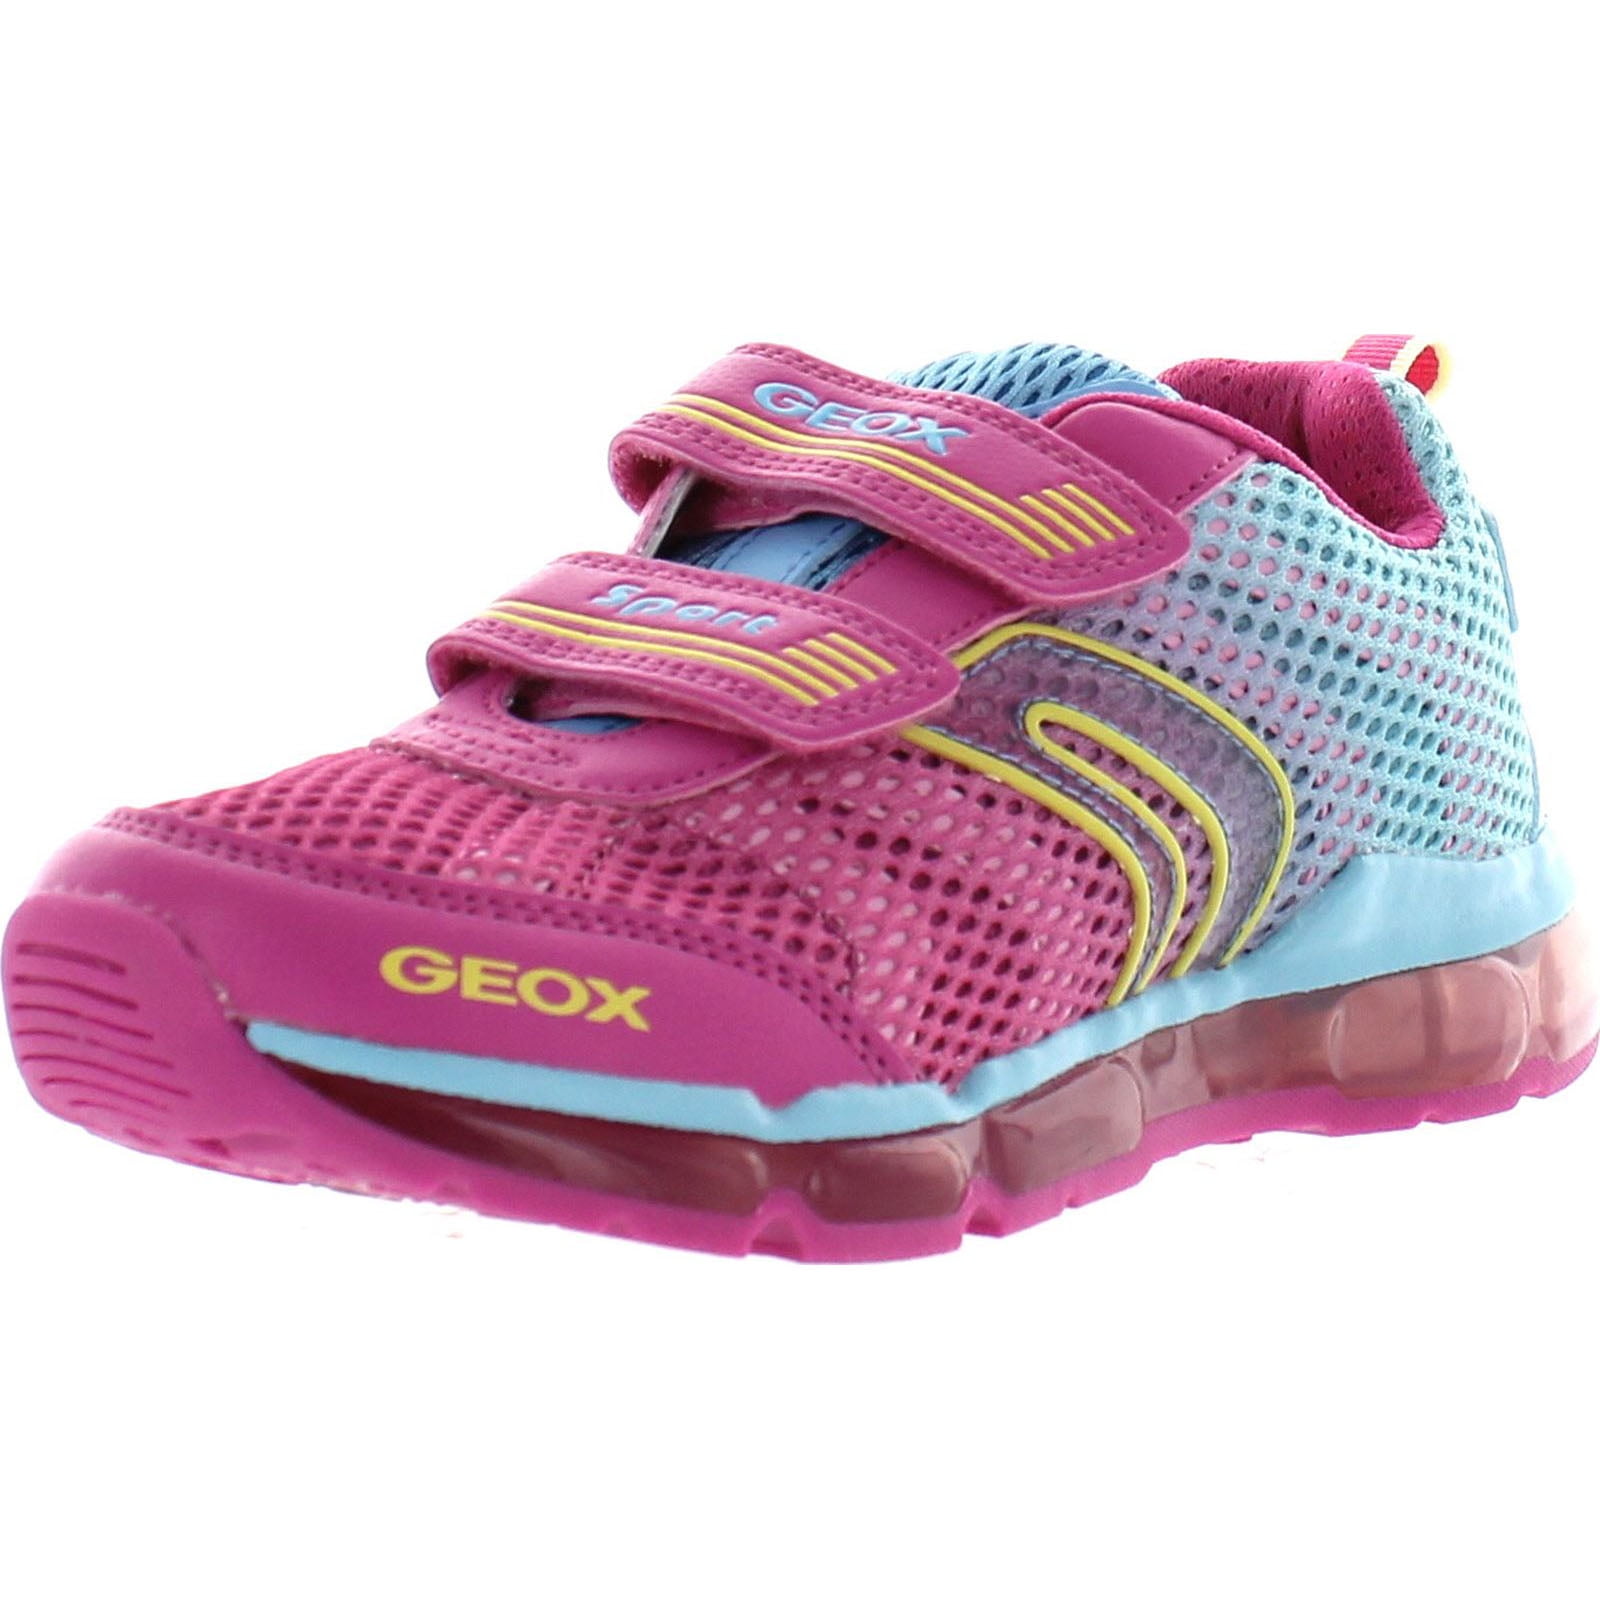 GEOX Girls Jr Android Girl Fashion Sneakers, 35 -